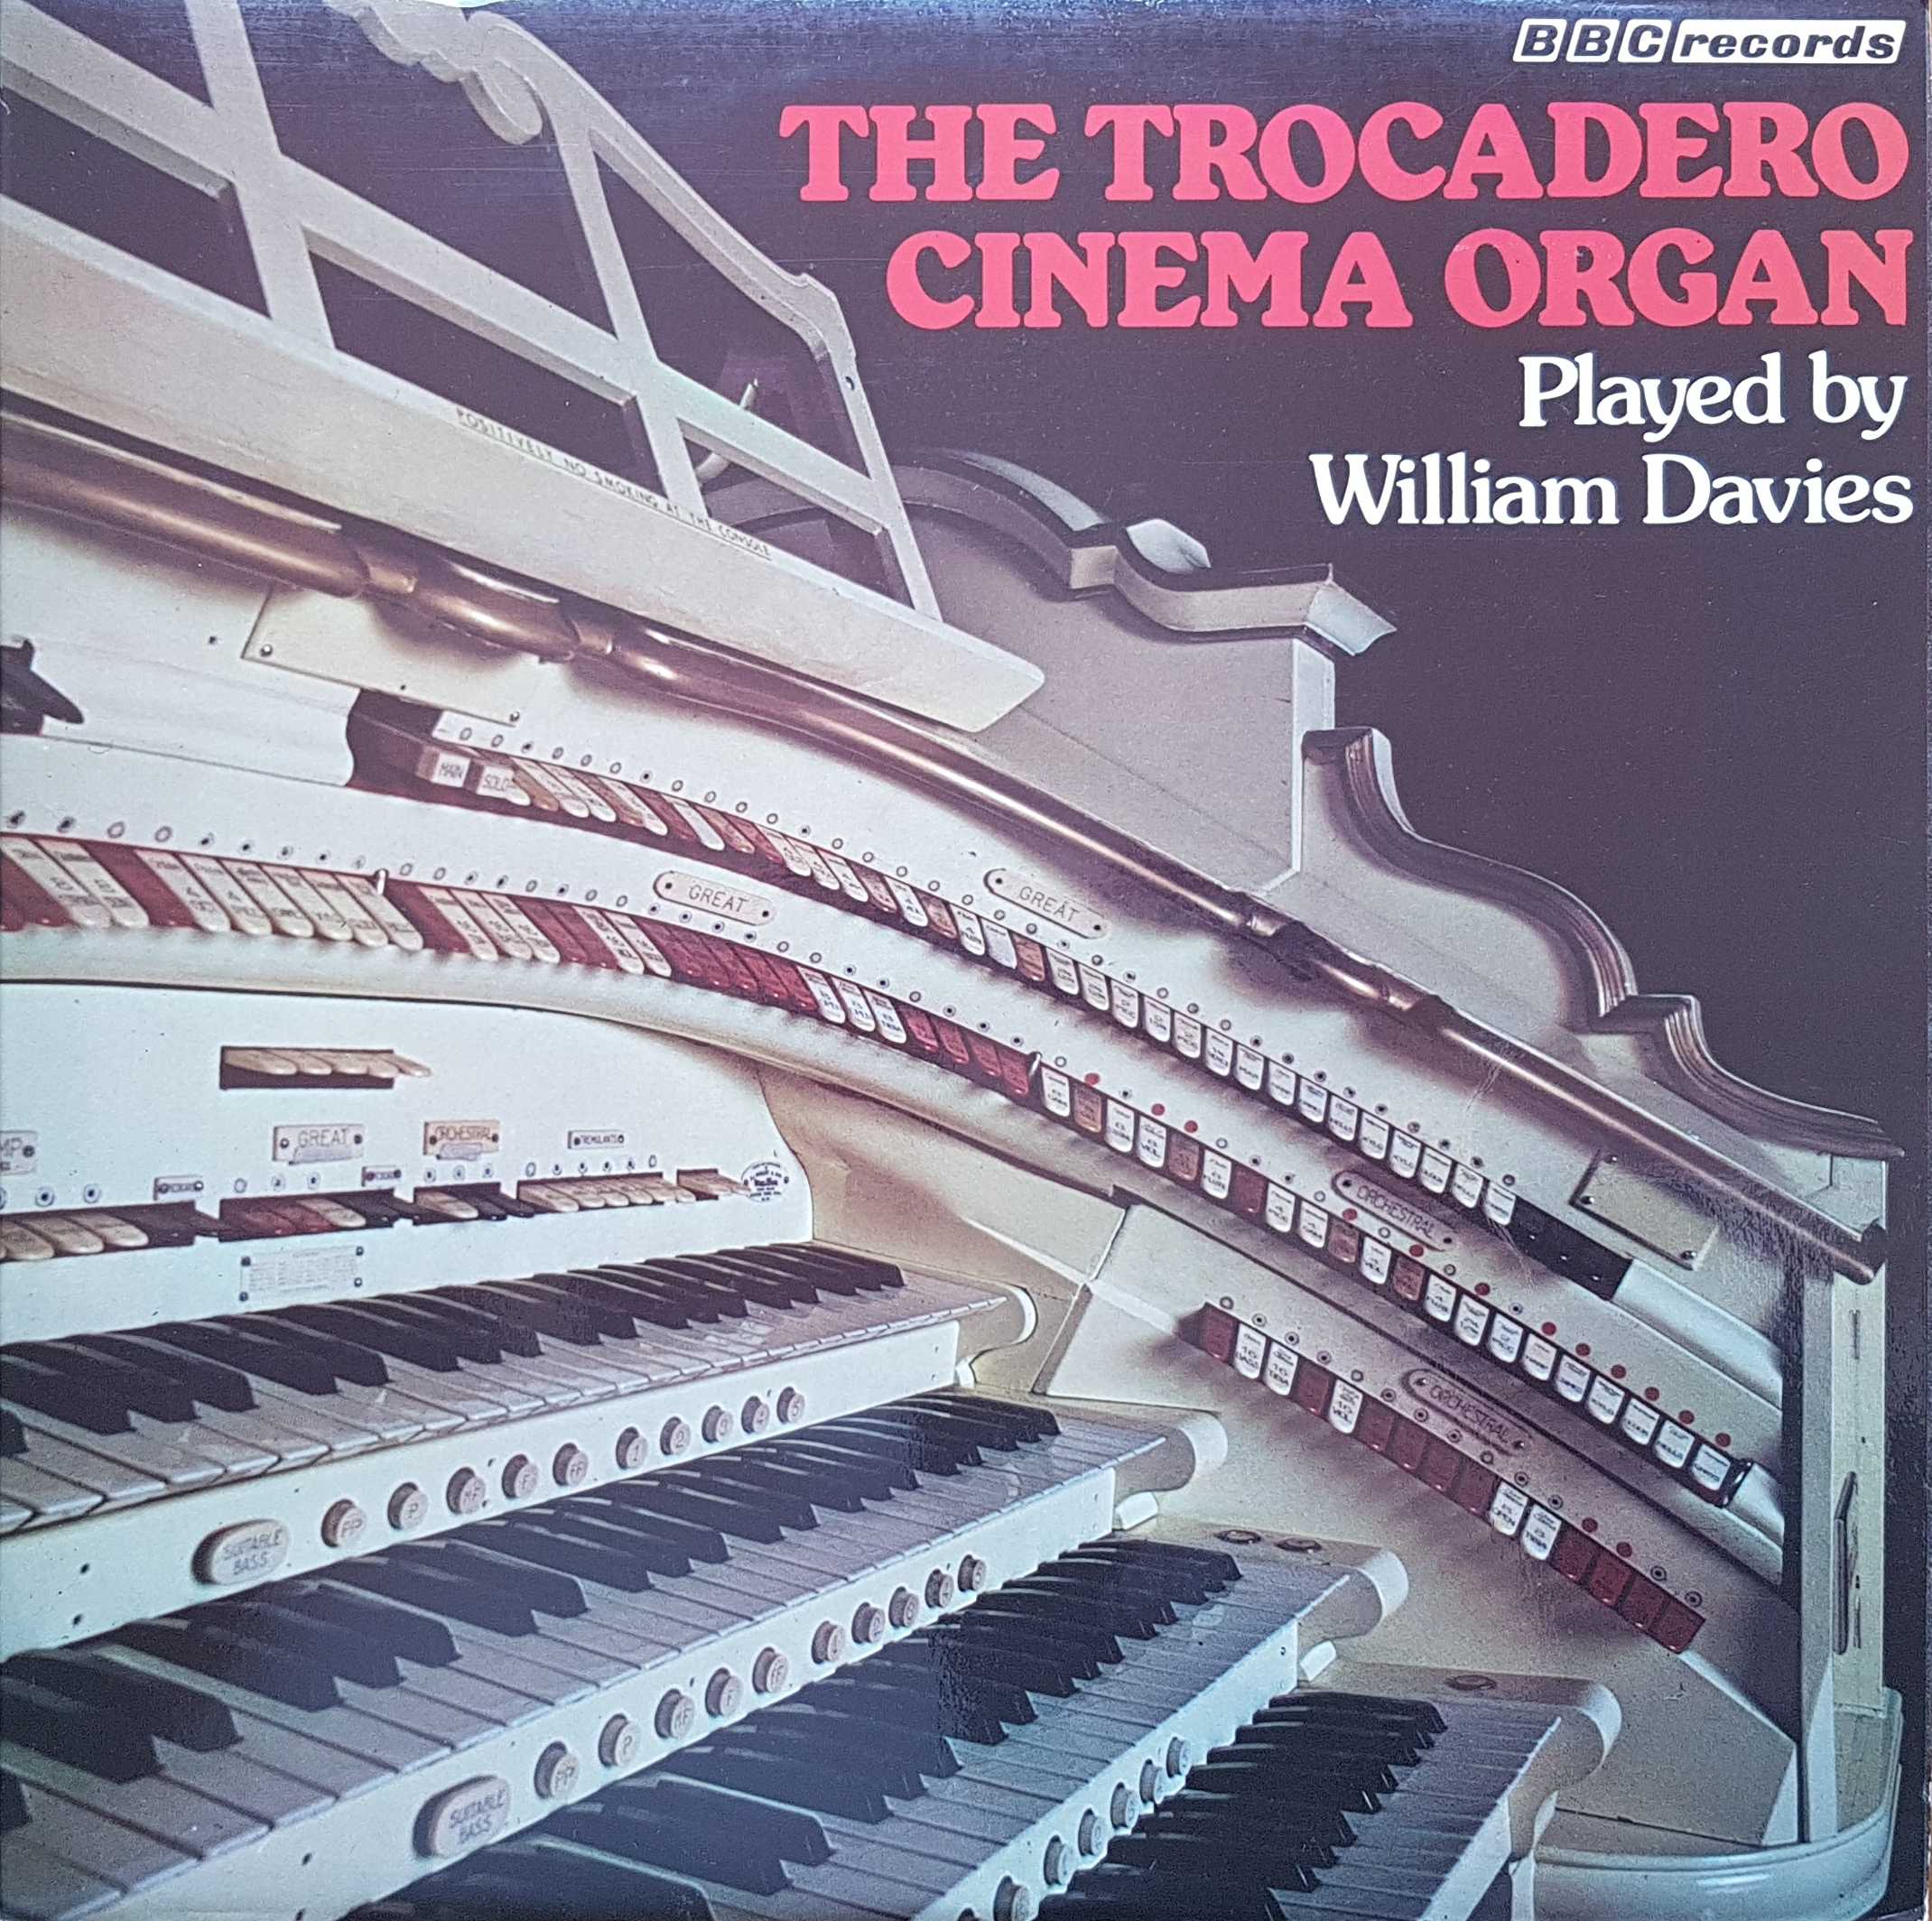 Picture of REC 349 Trocadero cinema - William Davies by artist William Davies from the BBC albums - Records and Tapes library